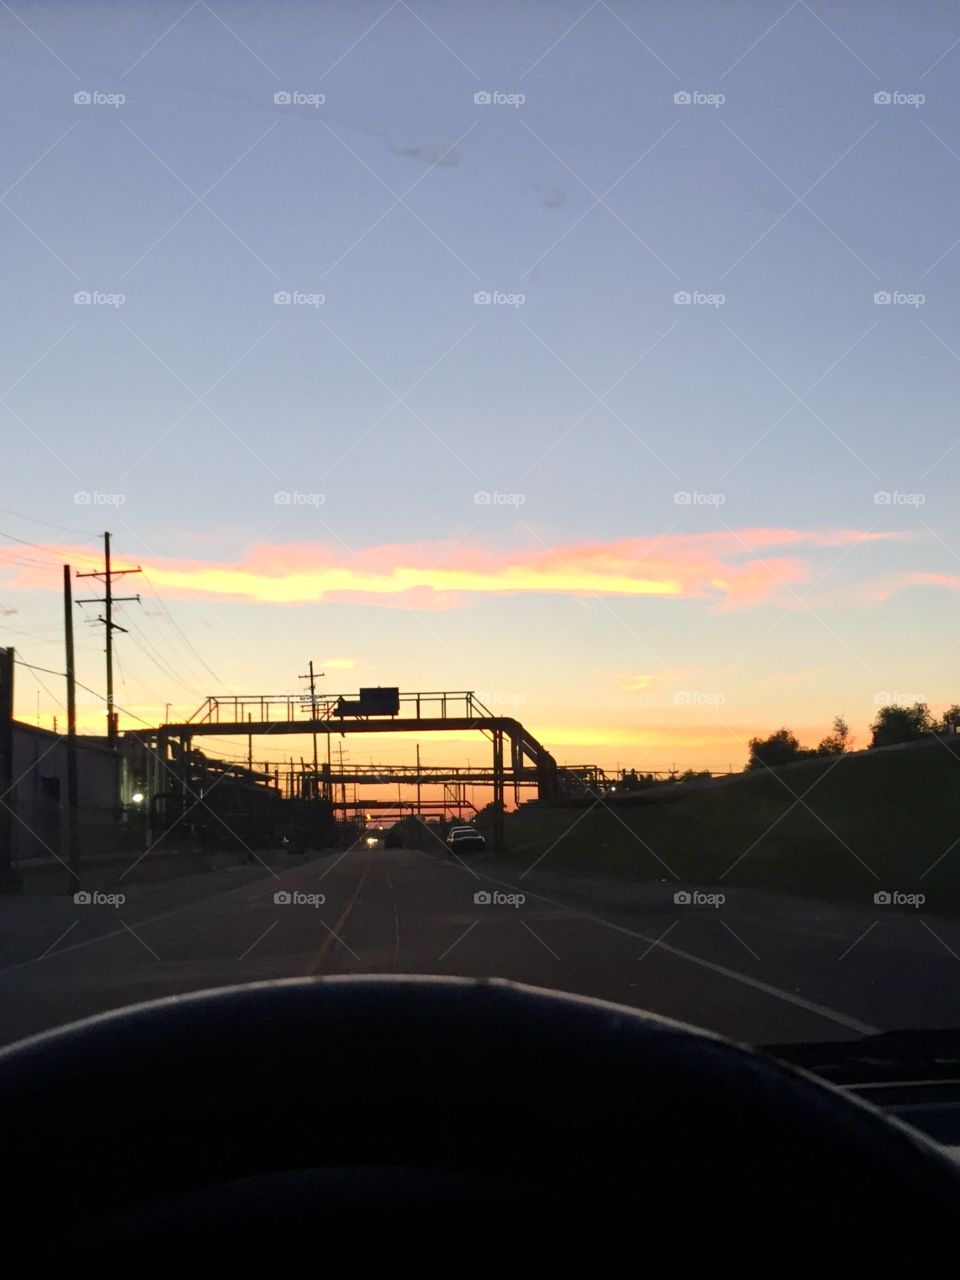 Industrial sunset 